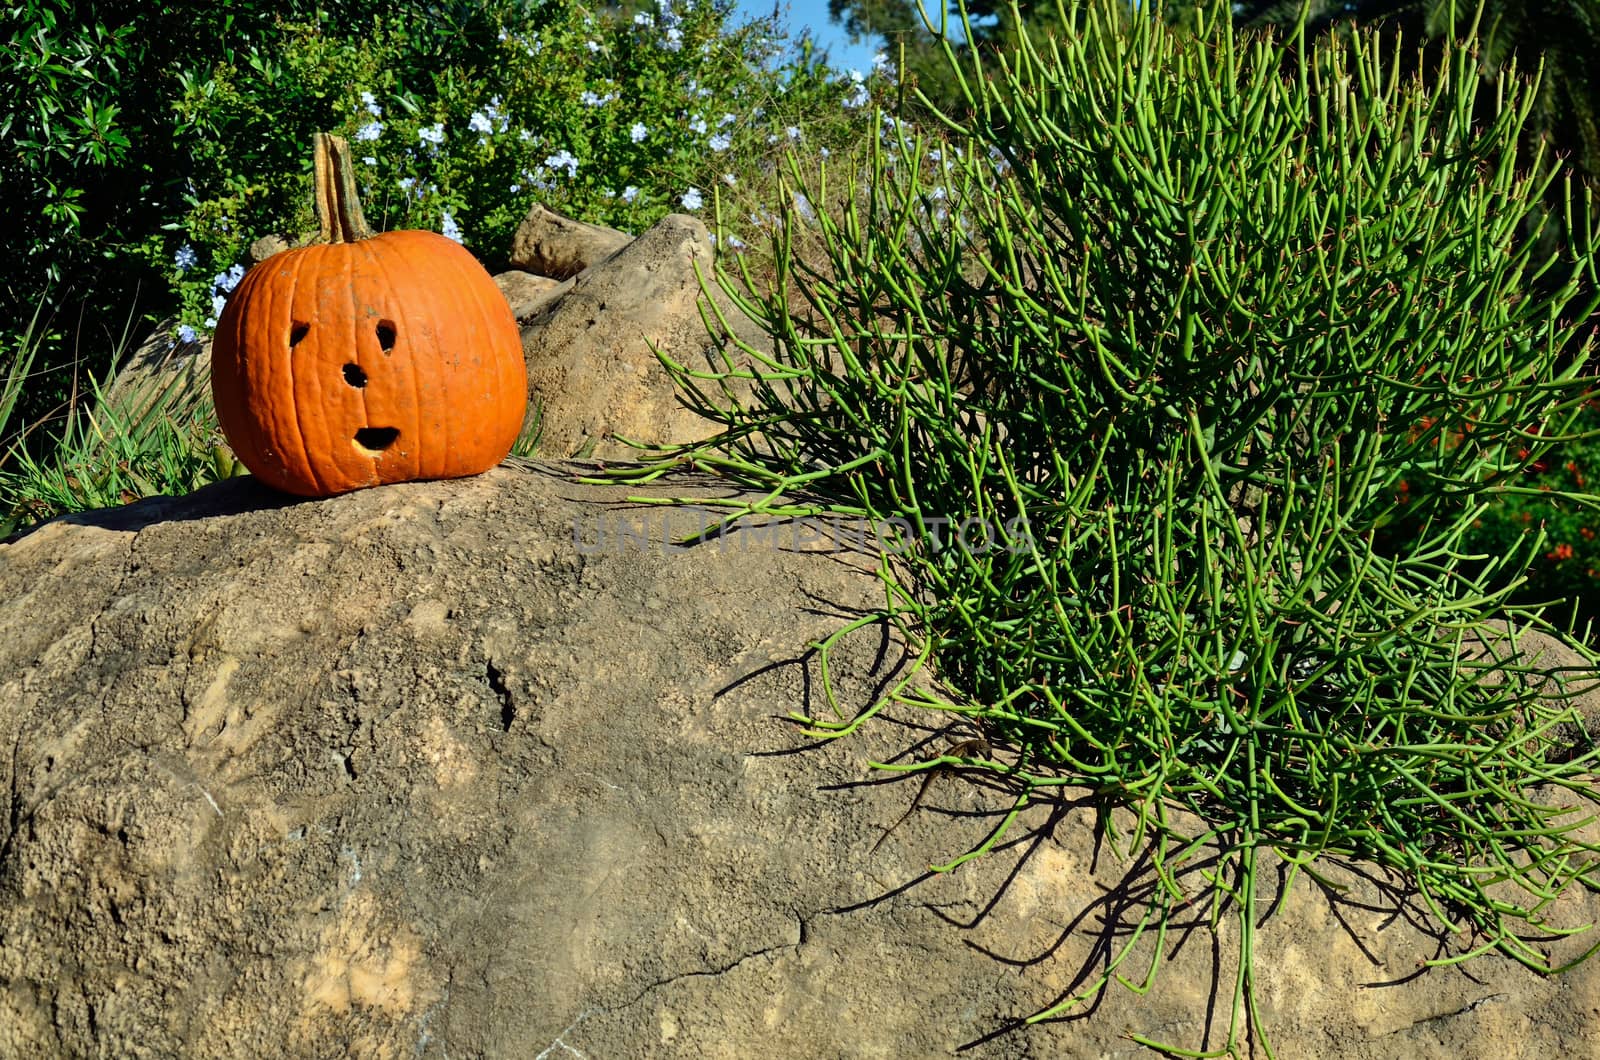 A jack-o-lantern sitting on a boulder appears to be surprised to find himself there.